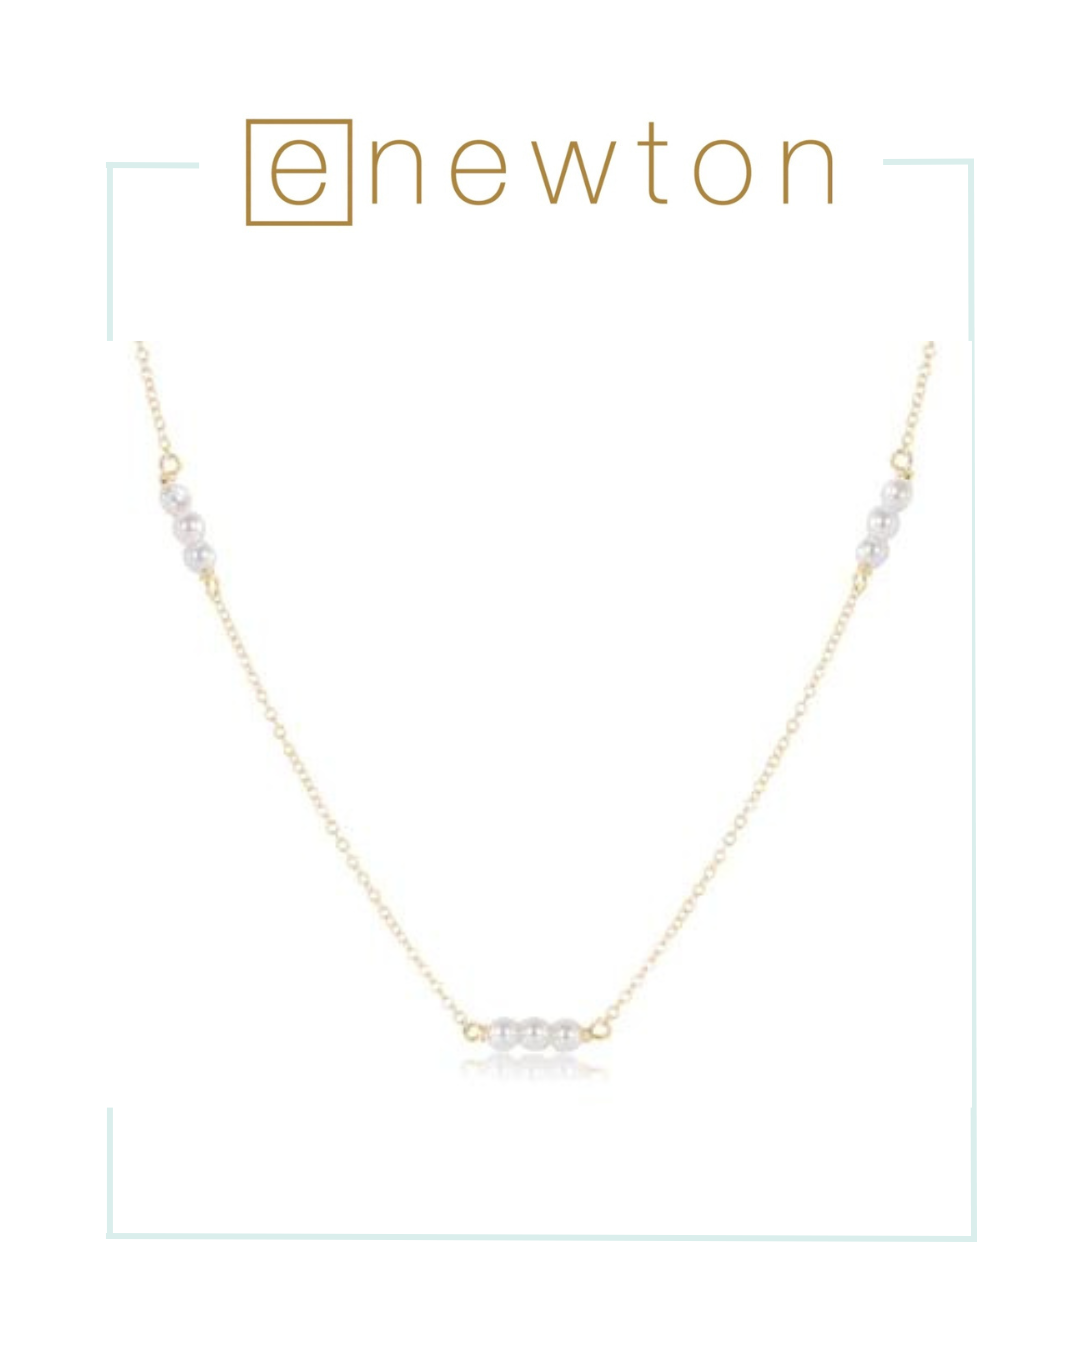 E Newton 17" Choker Joy Simplicity Chain Gold - 3mm Pearl-Necklaces-ENEWTON-The Village Shoppe, Women’s Fashion Boutique, Shop Online and In Store - Located in Muscle Shoals, AL.